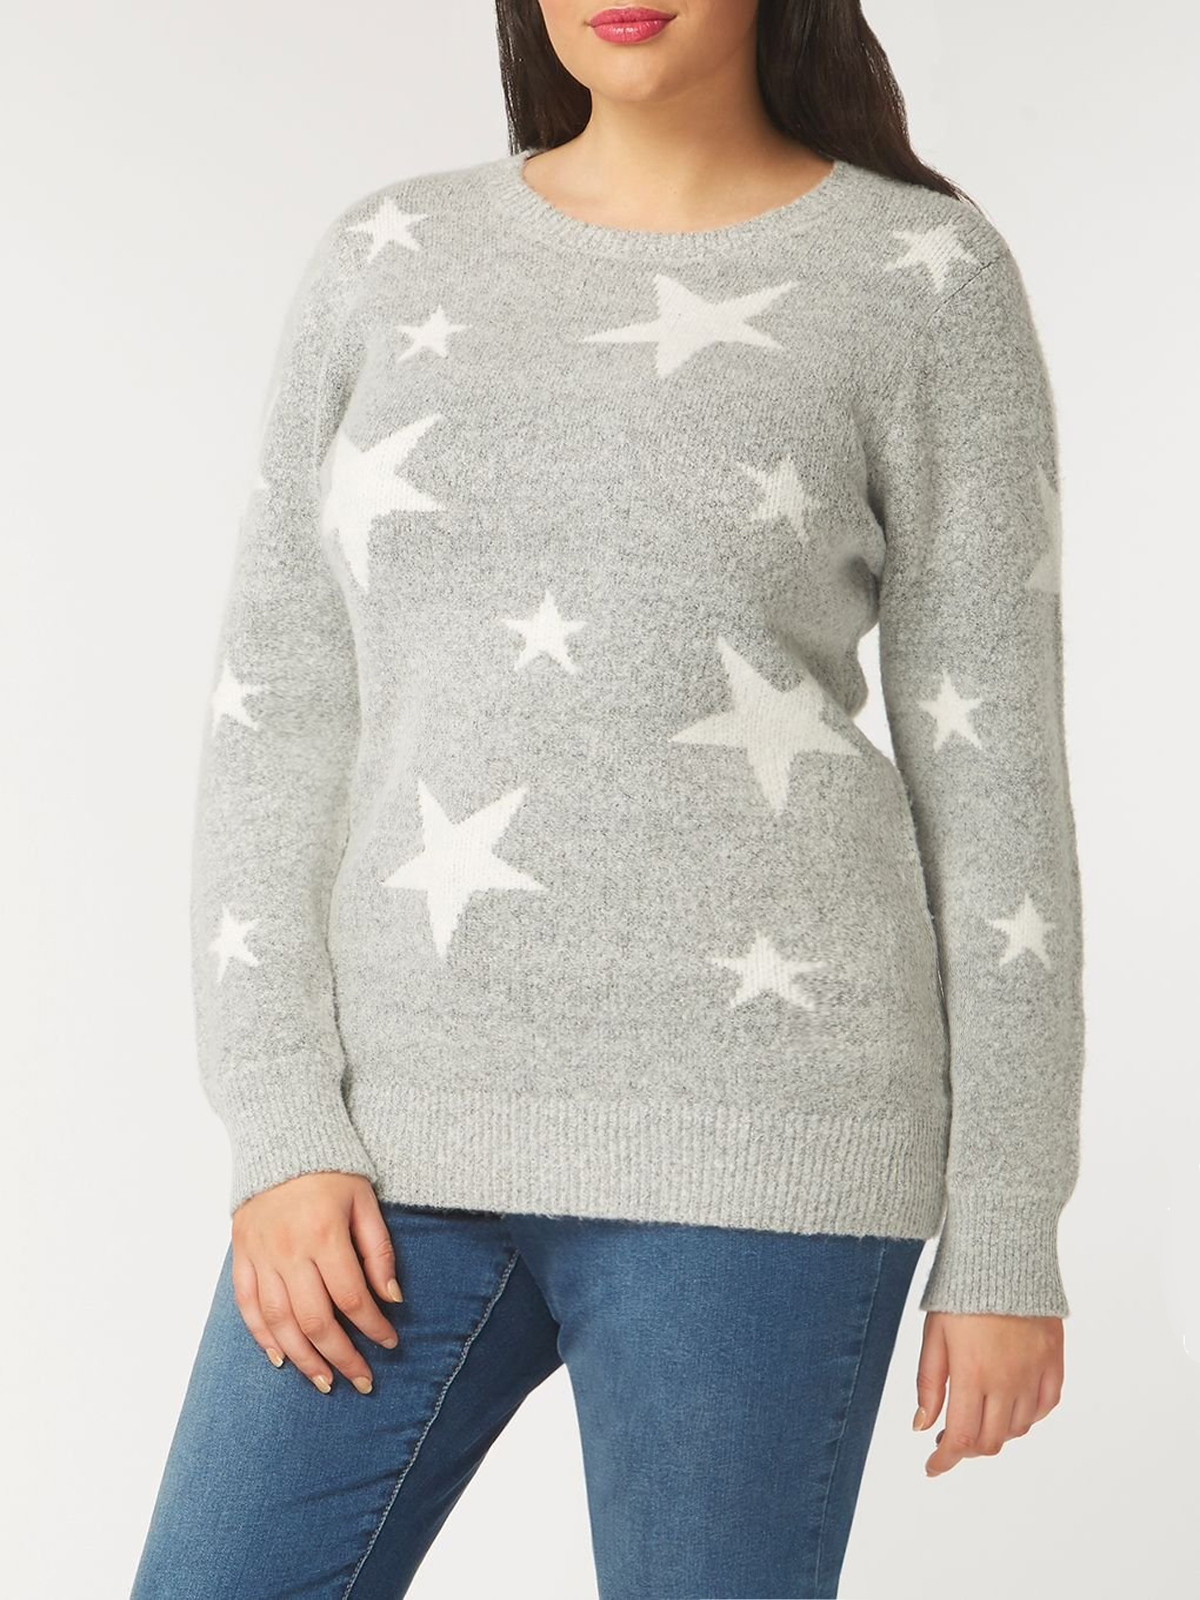 GREY Star Print Knitted Jumper - Plus Size 22/24 to 30/32